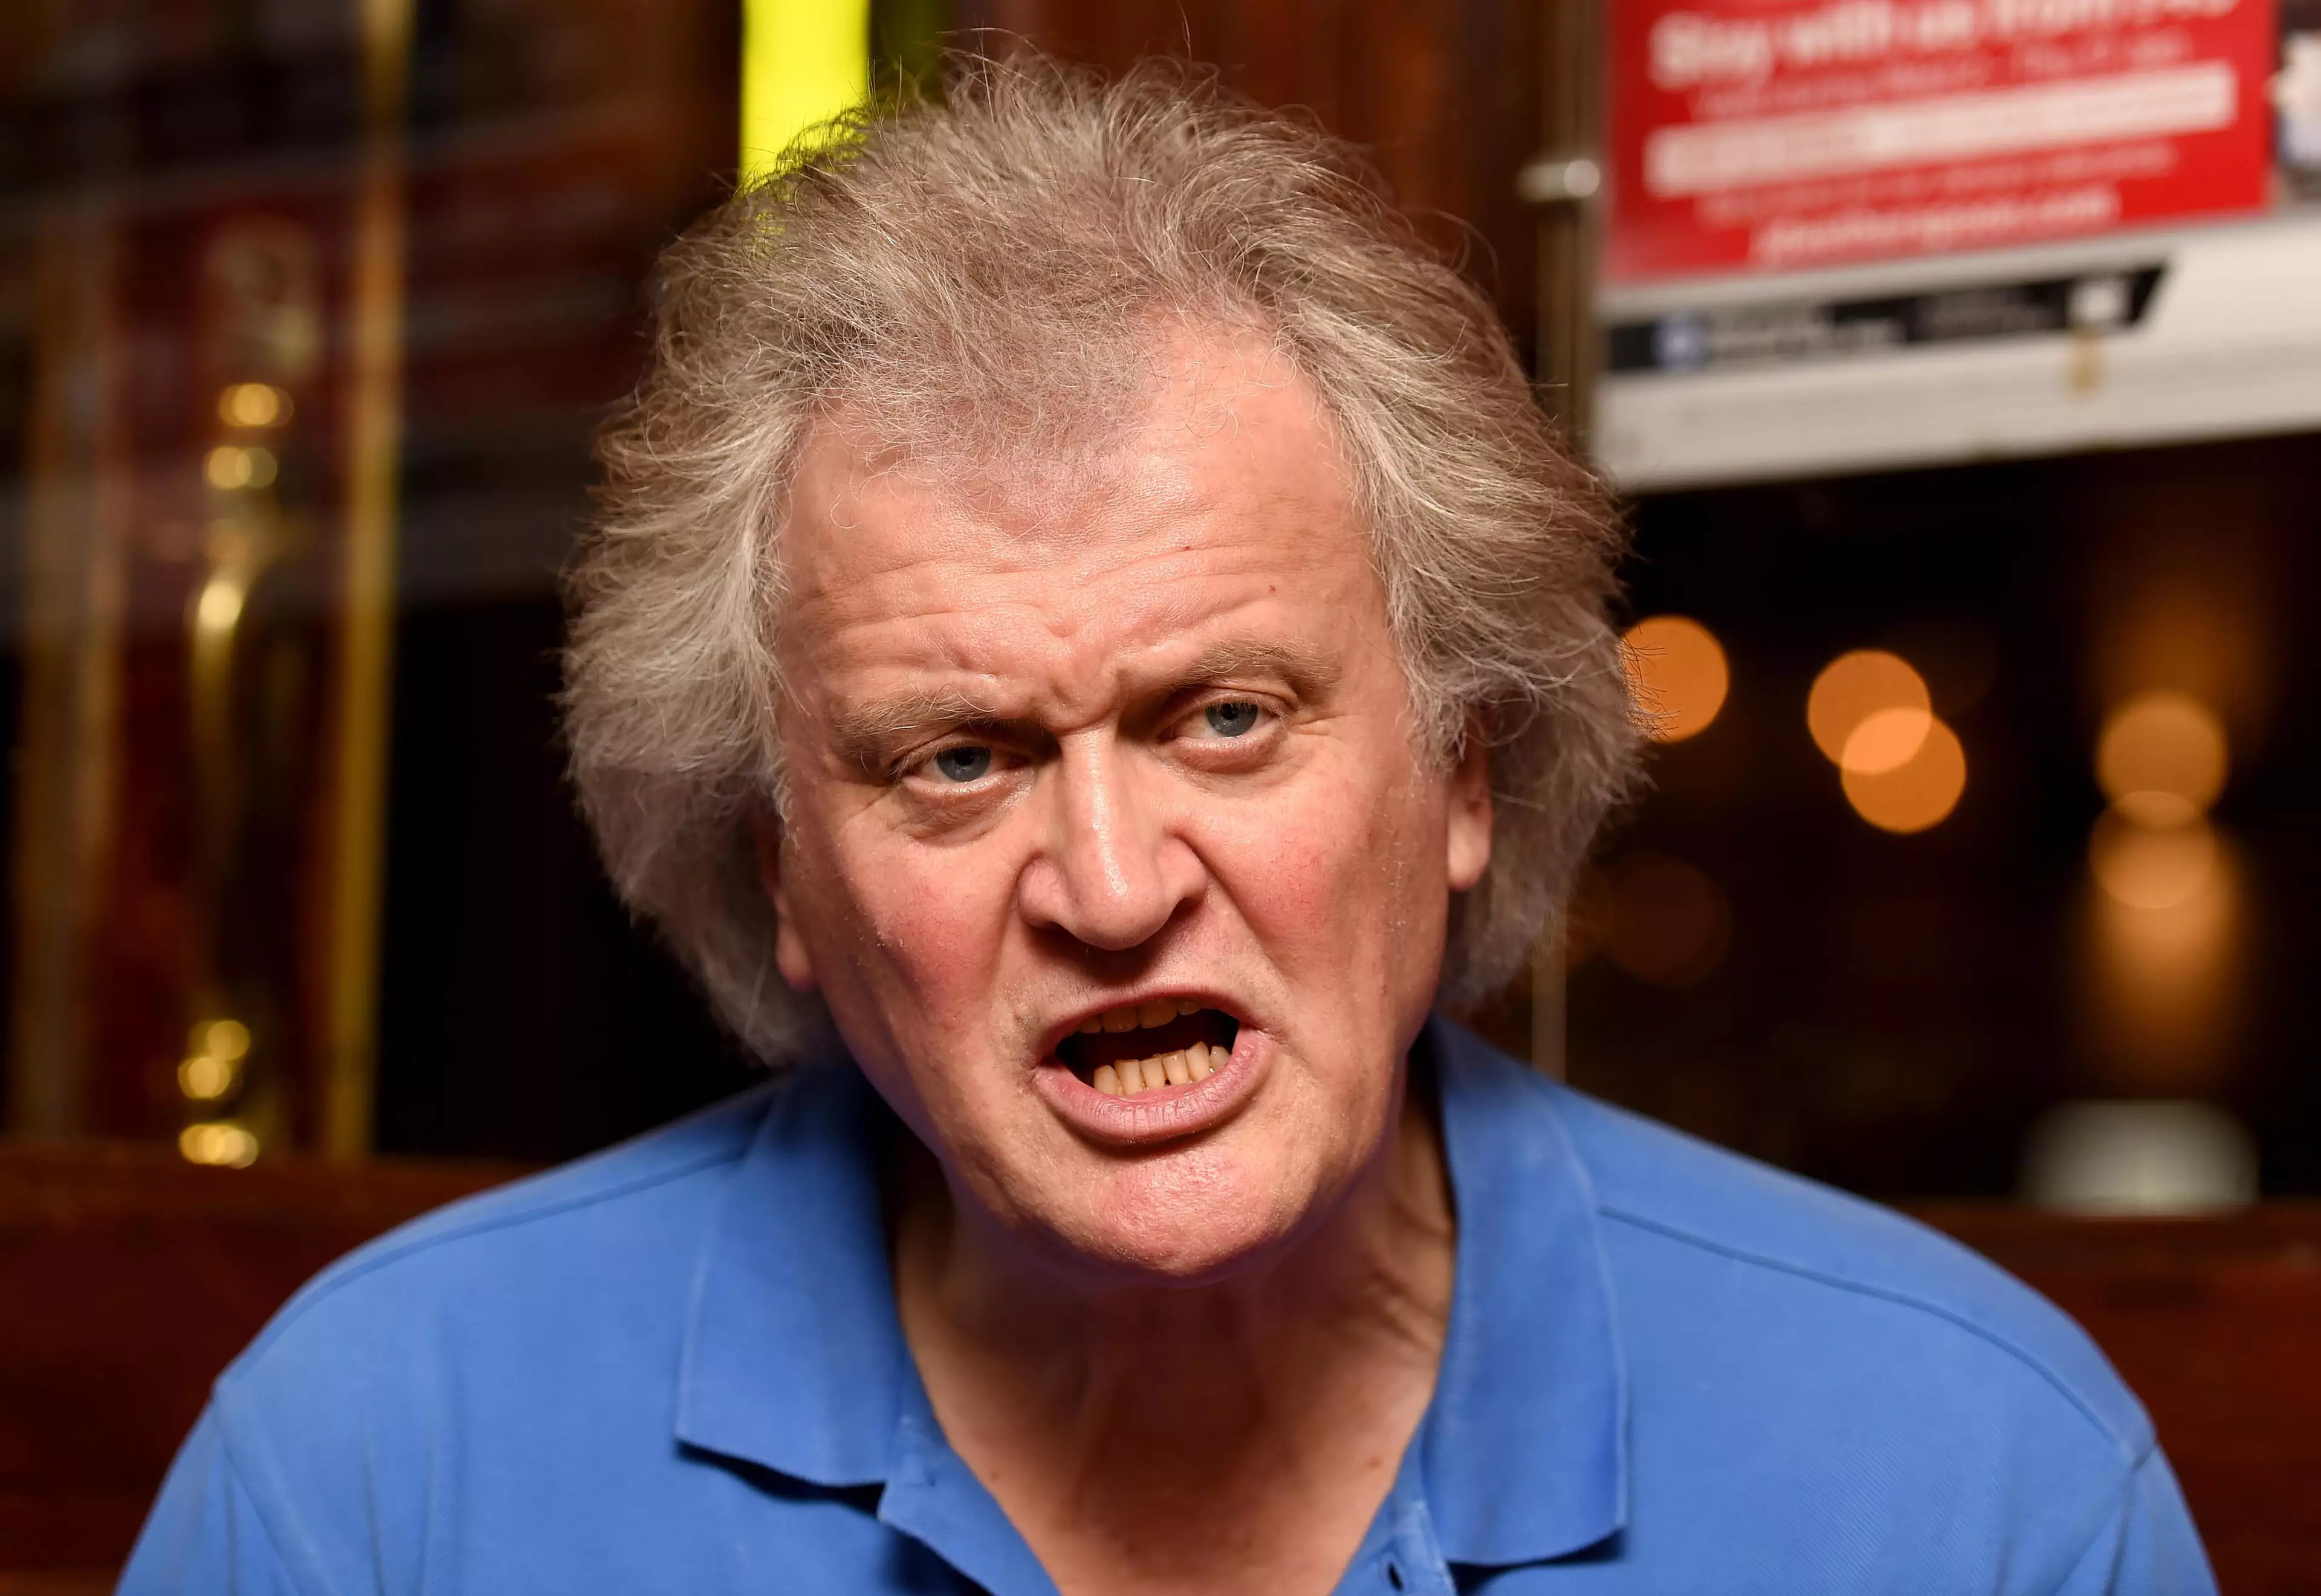 Martin says he'll never retire, and will keep working at Wetherspoon.